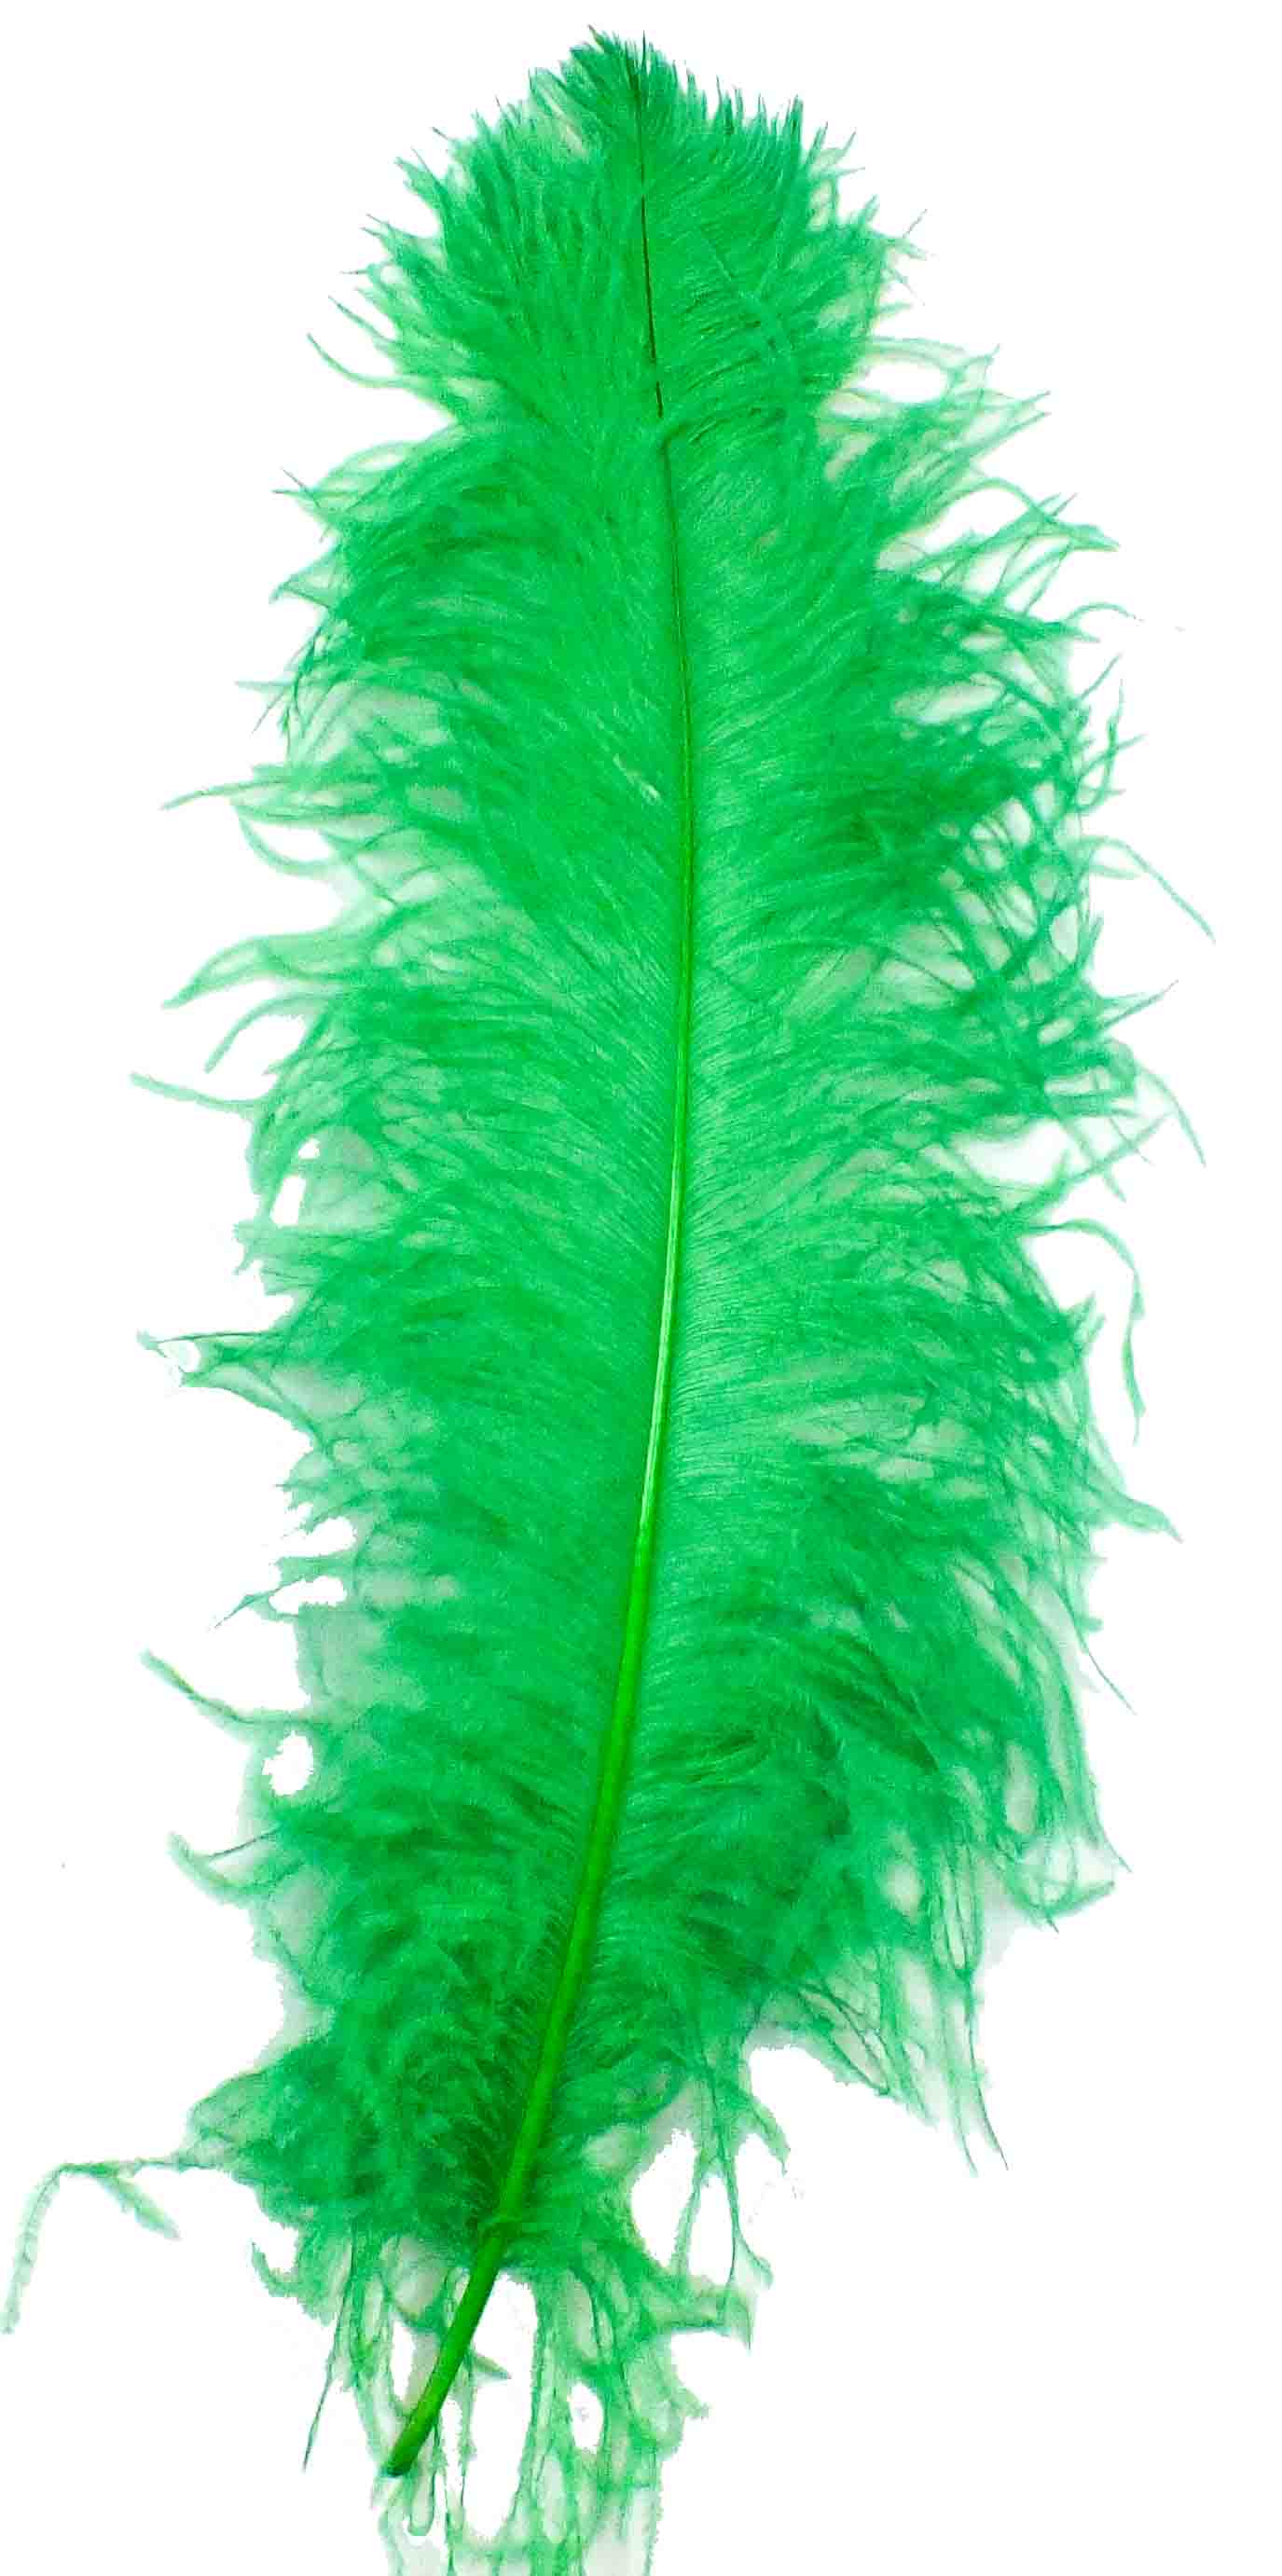 6 Green Feathers